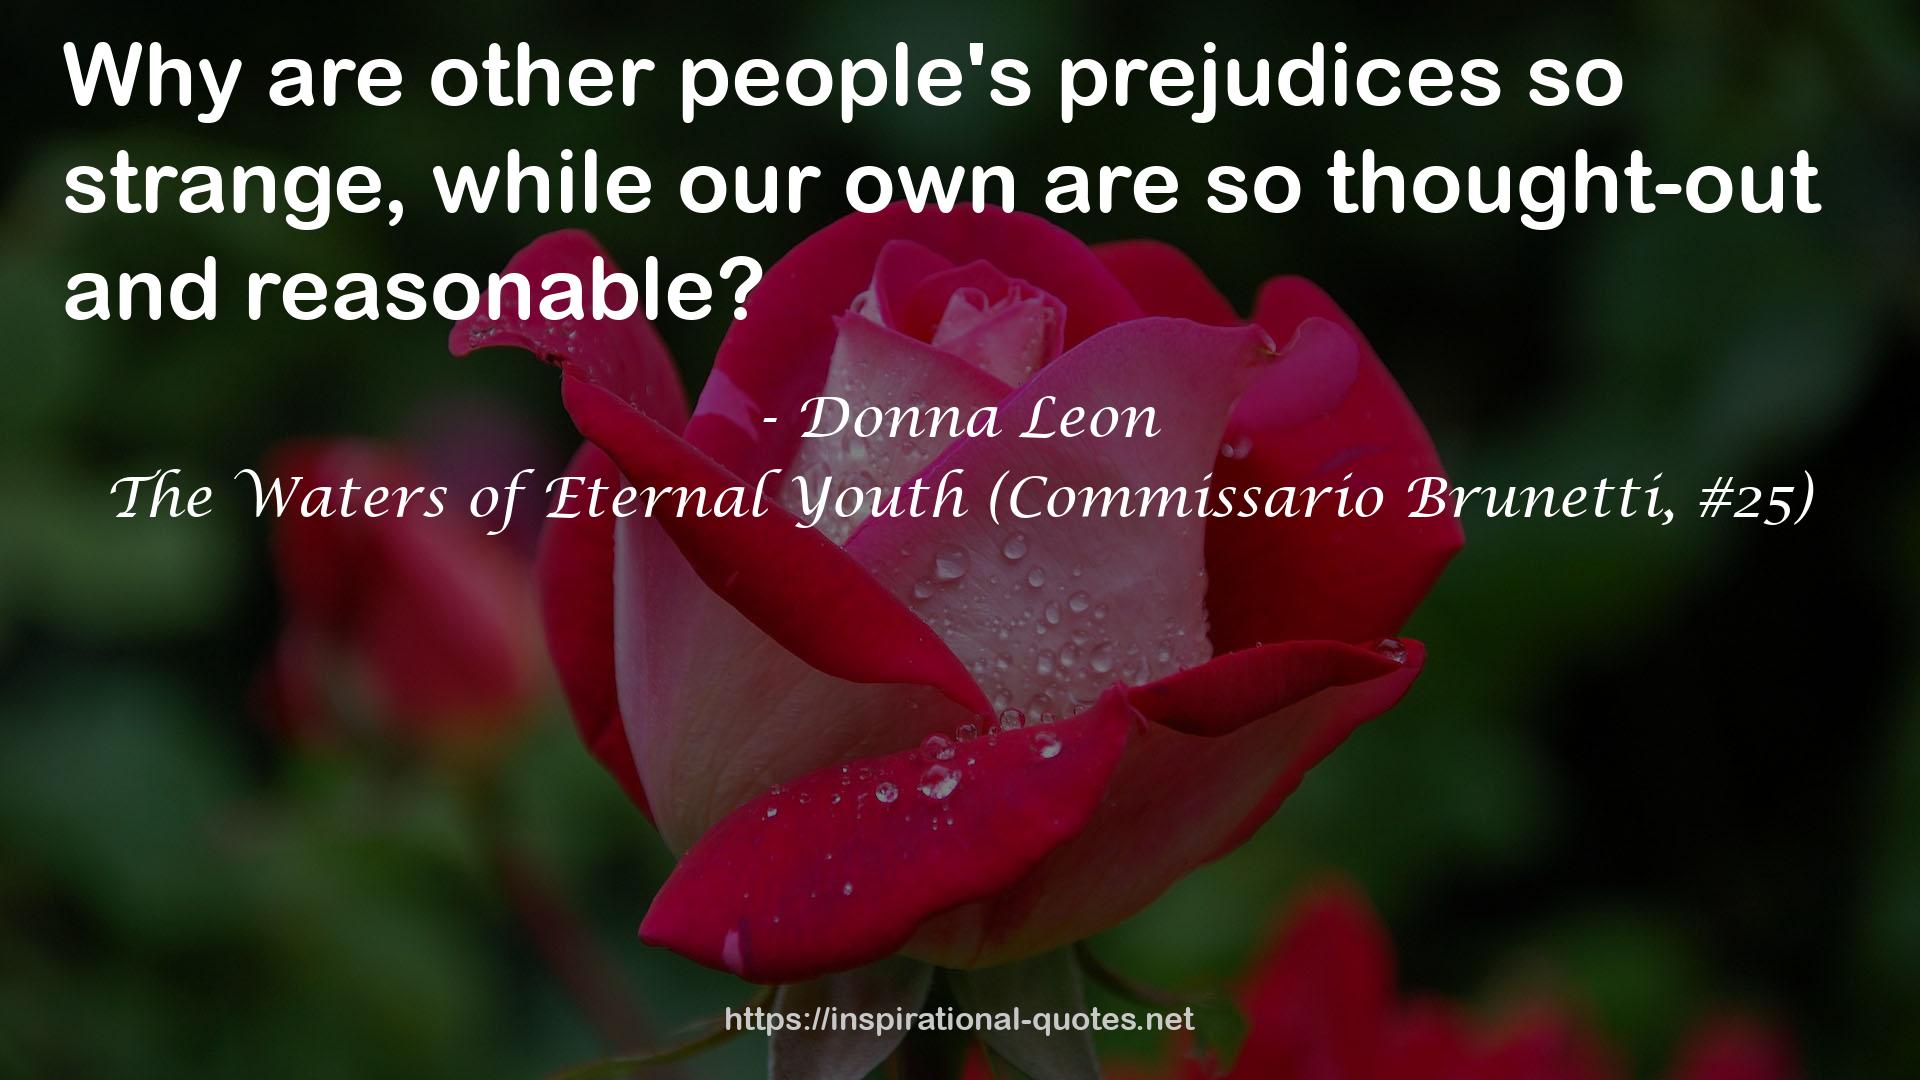 The Waters of Eternal Youth (Commissario Brunetti, #25) QUOTES